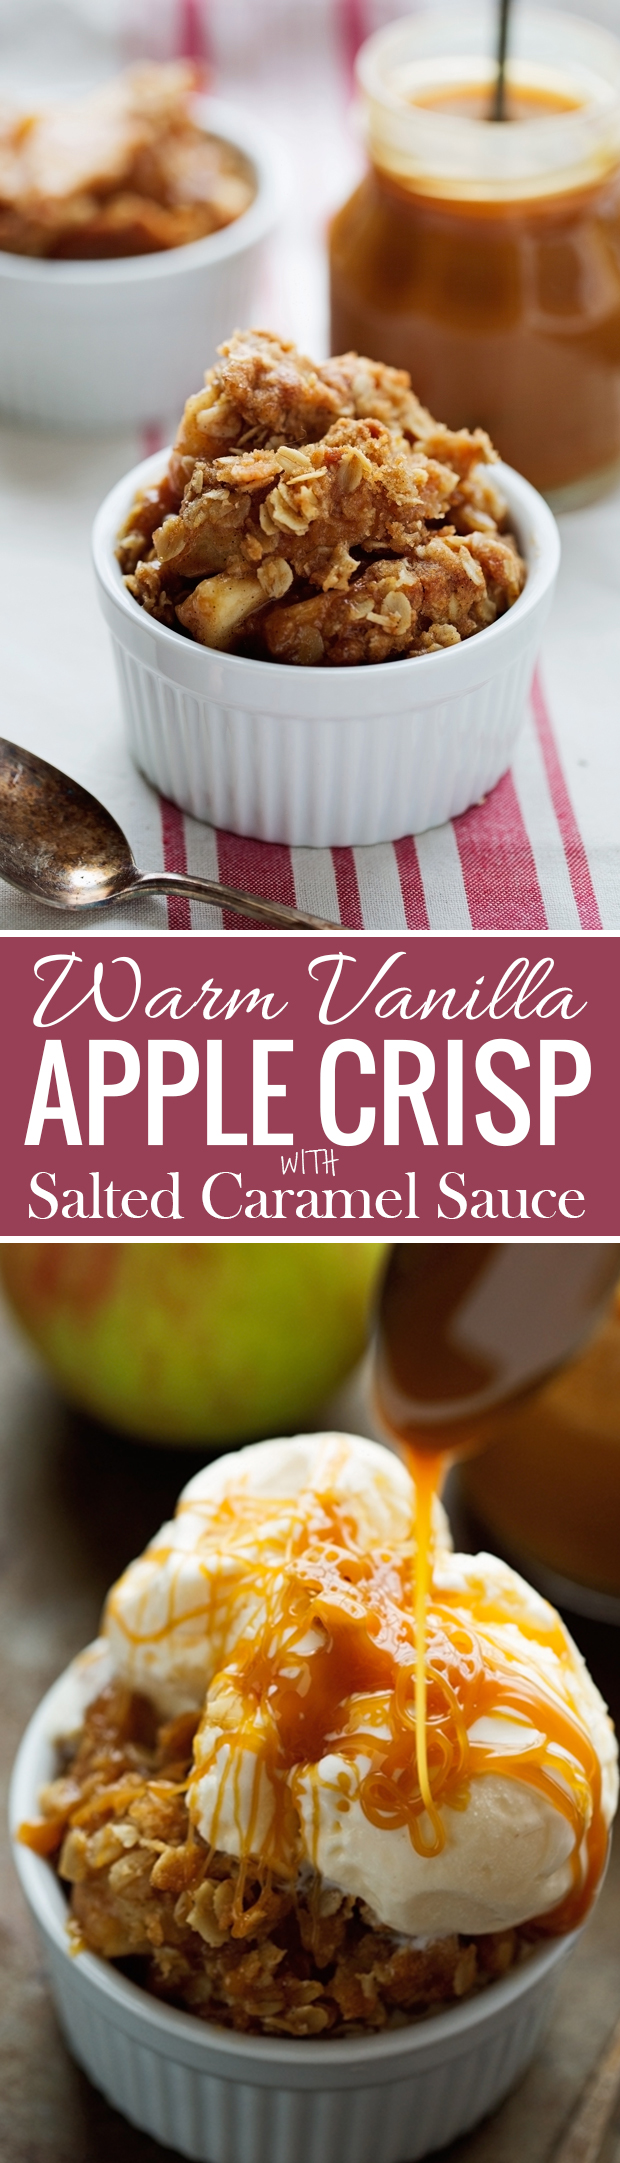 Warm Vanilla Apple Crisp with Salted Caramel Sauce - An easy alternative to baking an apple pie! Topped with a buttery oat topping, it is so good! #applepie #applecrumble #applecrisp #saltedcaramelsauce | Littlespicejar.com @littlepsicejar